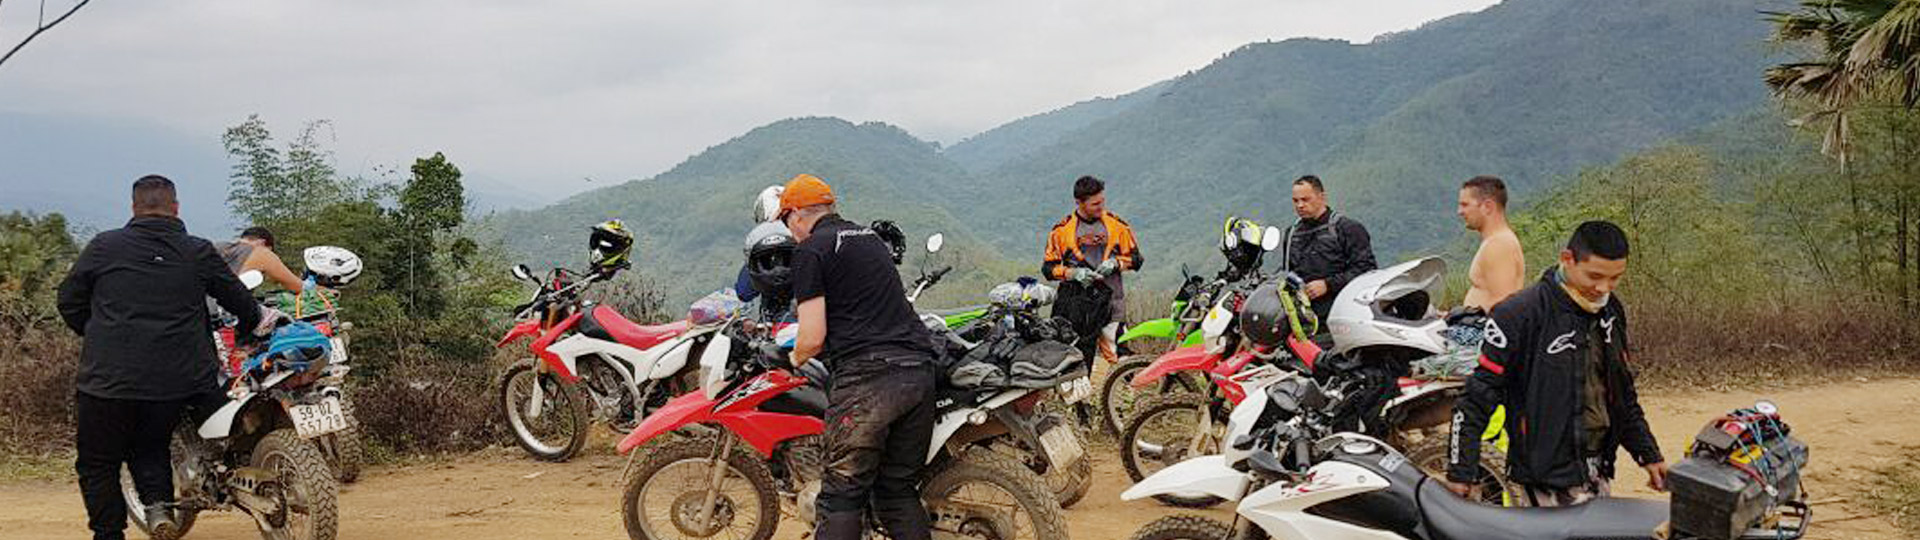 Mighty Mandalay Motorcycle Tour - 5 Days